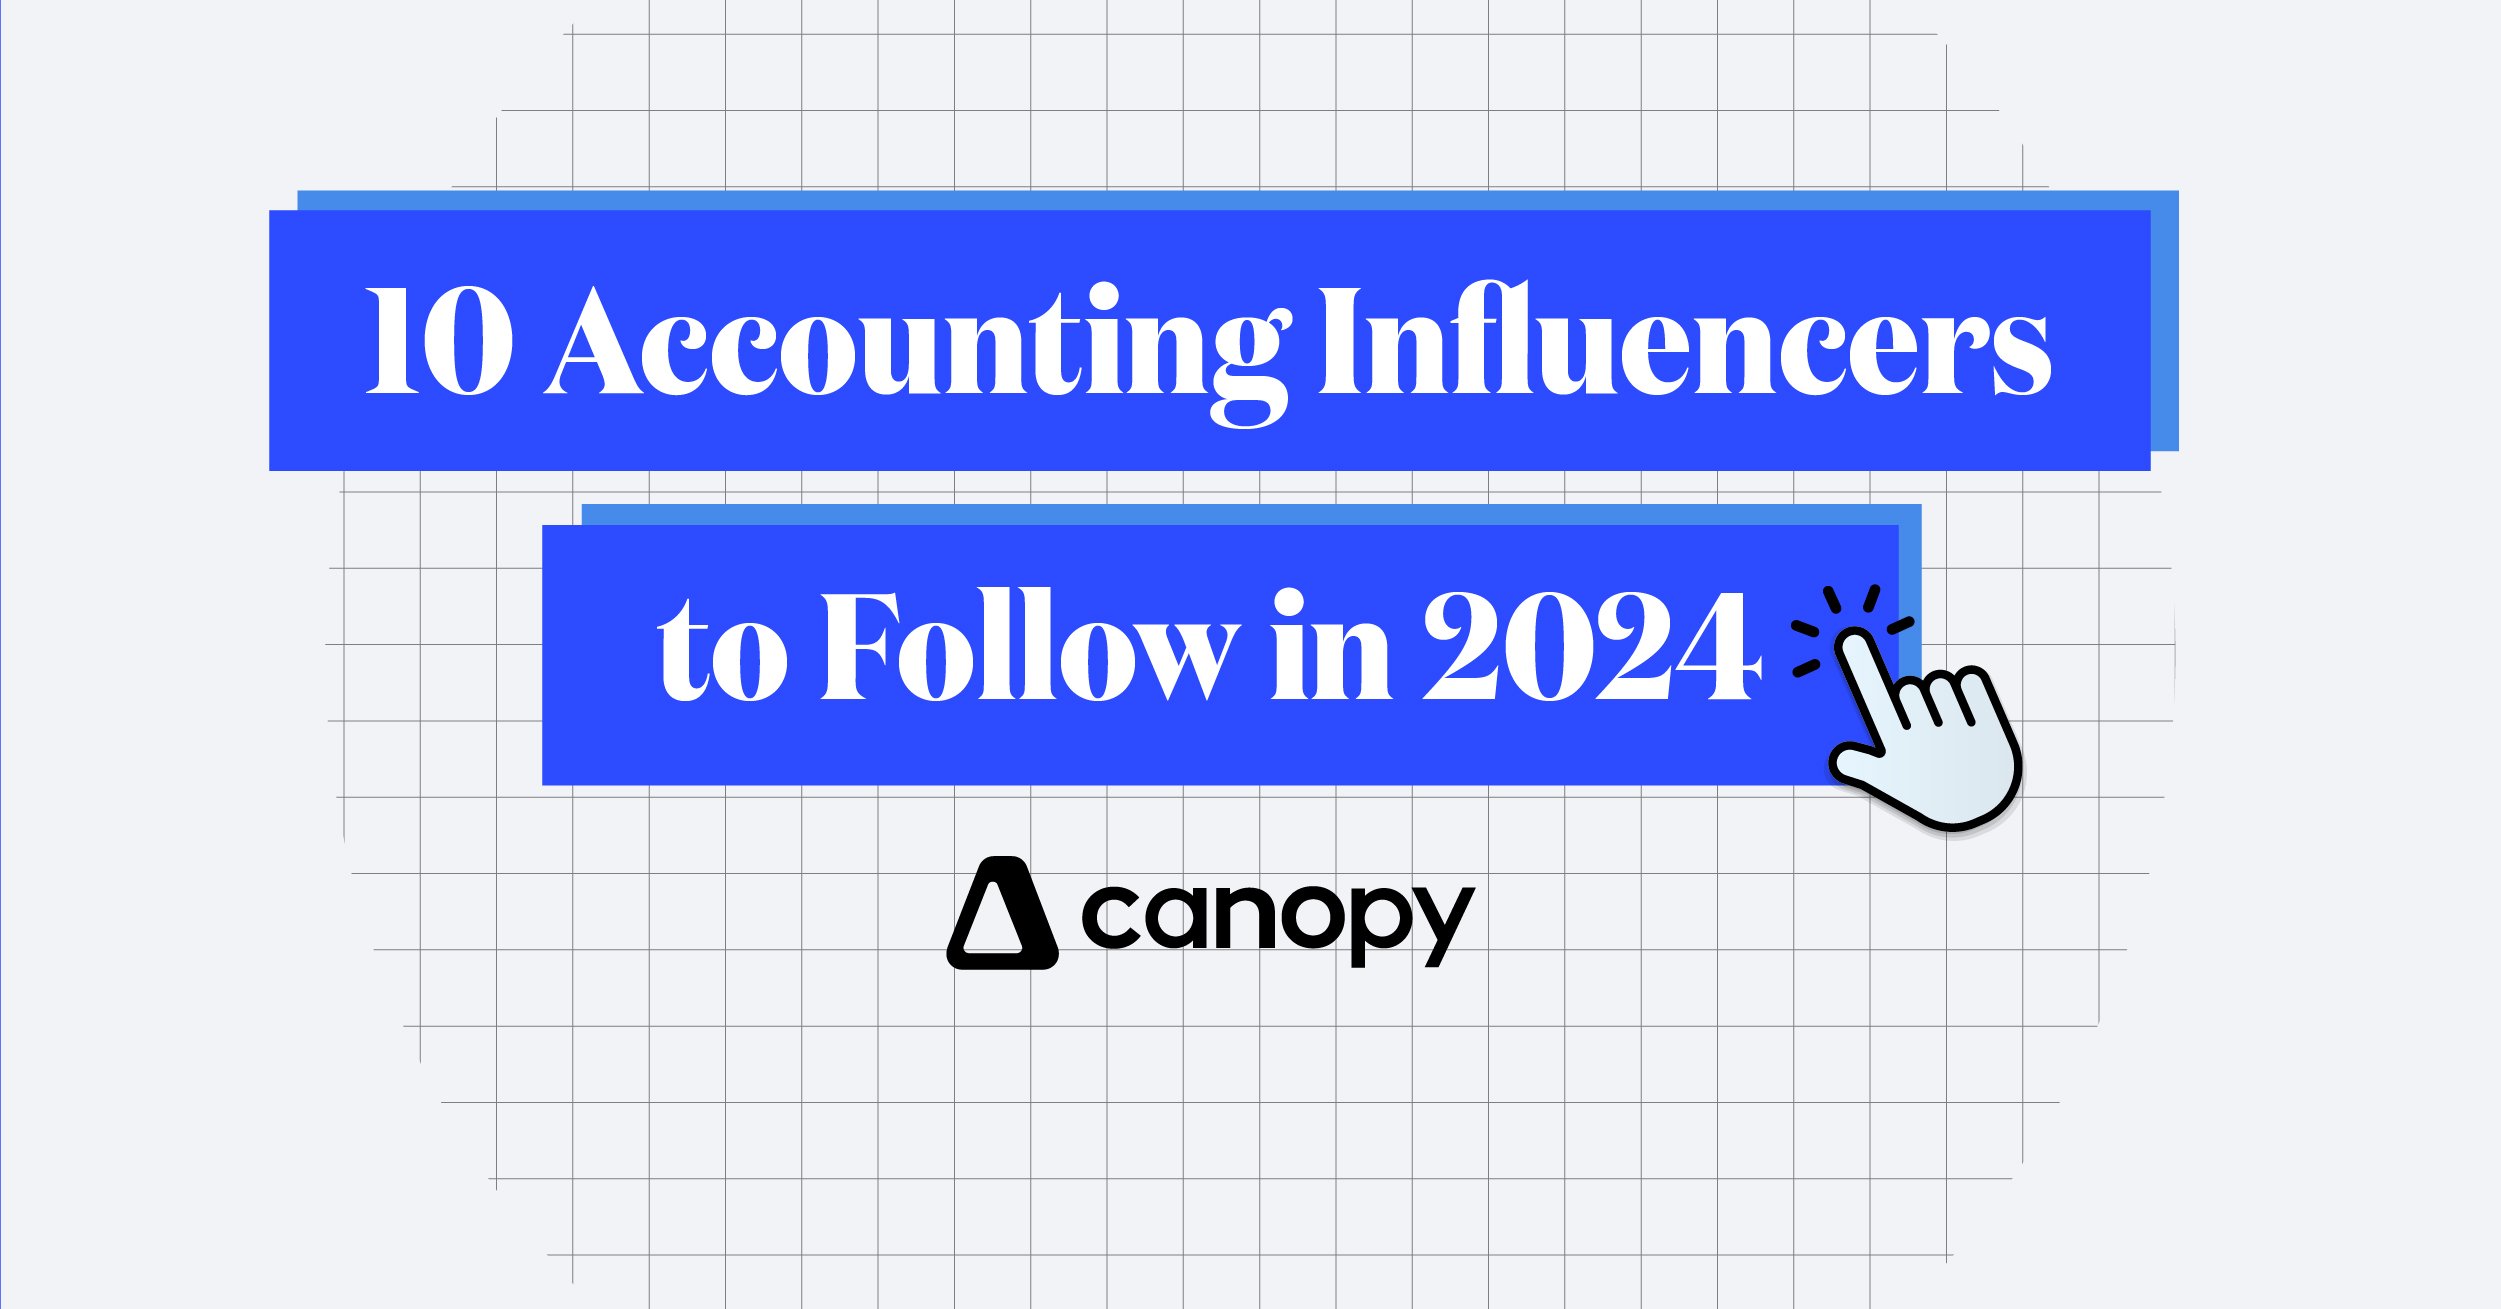 10 Accounting Influencers to Follow in 2024